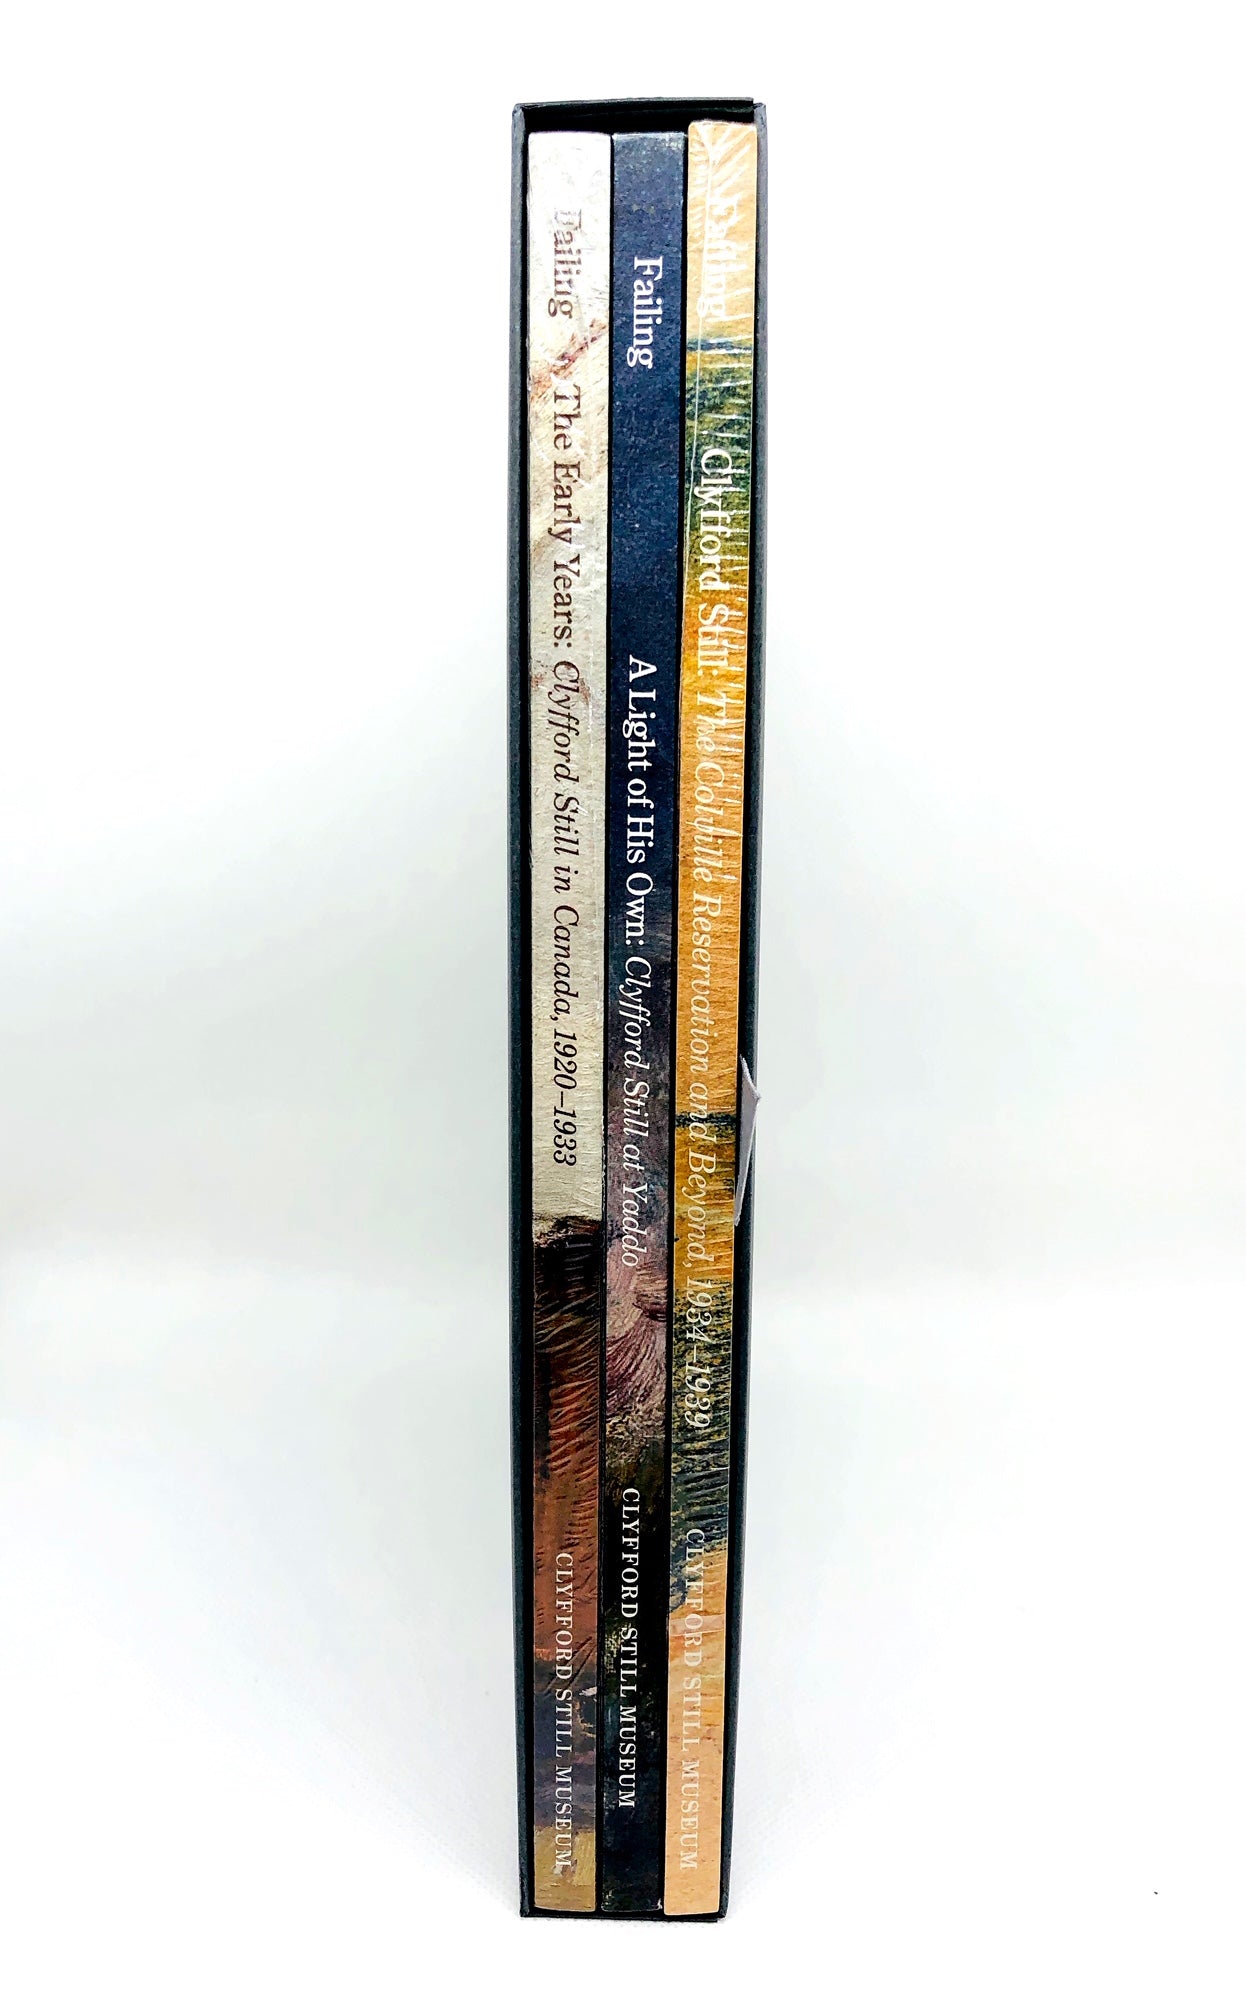 Spine of the ‘Clyfford Still, Early Works: 1920-1939 Gift Set’ showcasing ‘A Light of His Own, 1920-1933’, ‘The Colville Reservation and Beyond, 1934-1939’ and ‘The Early Years: Clyfford Still in Canada, 1920-1933’. 